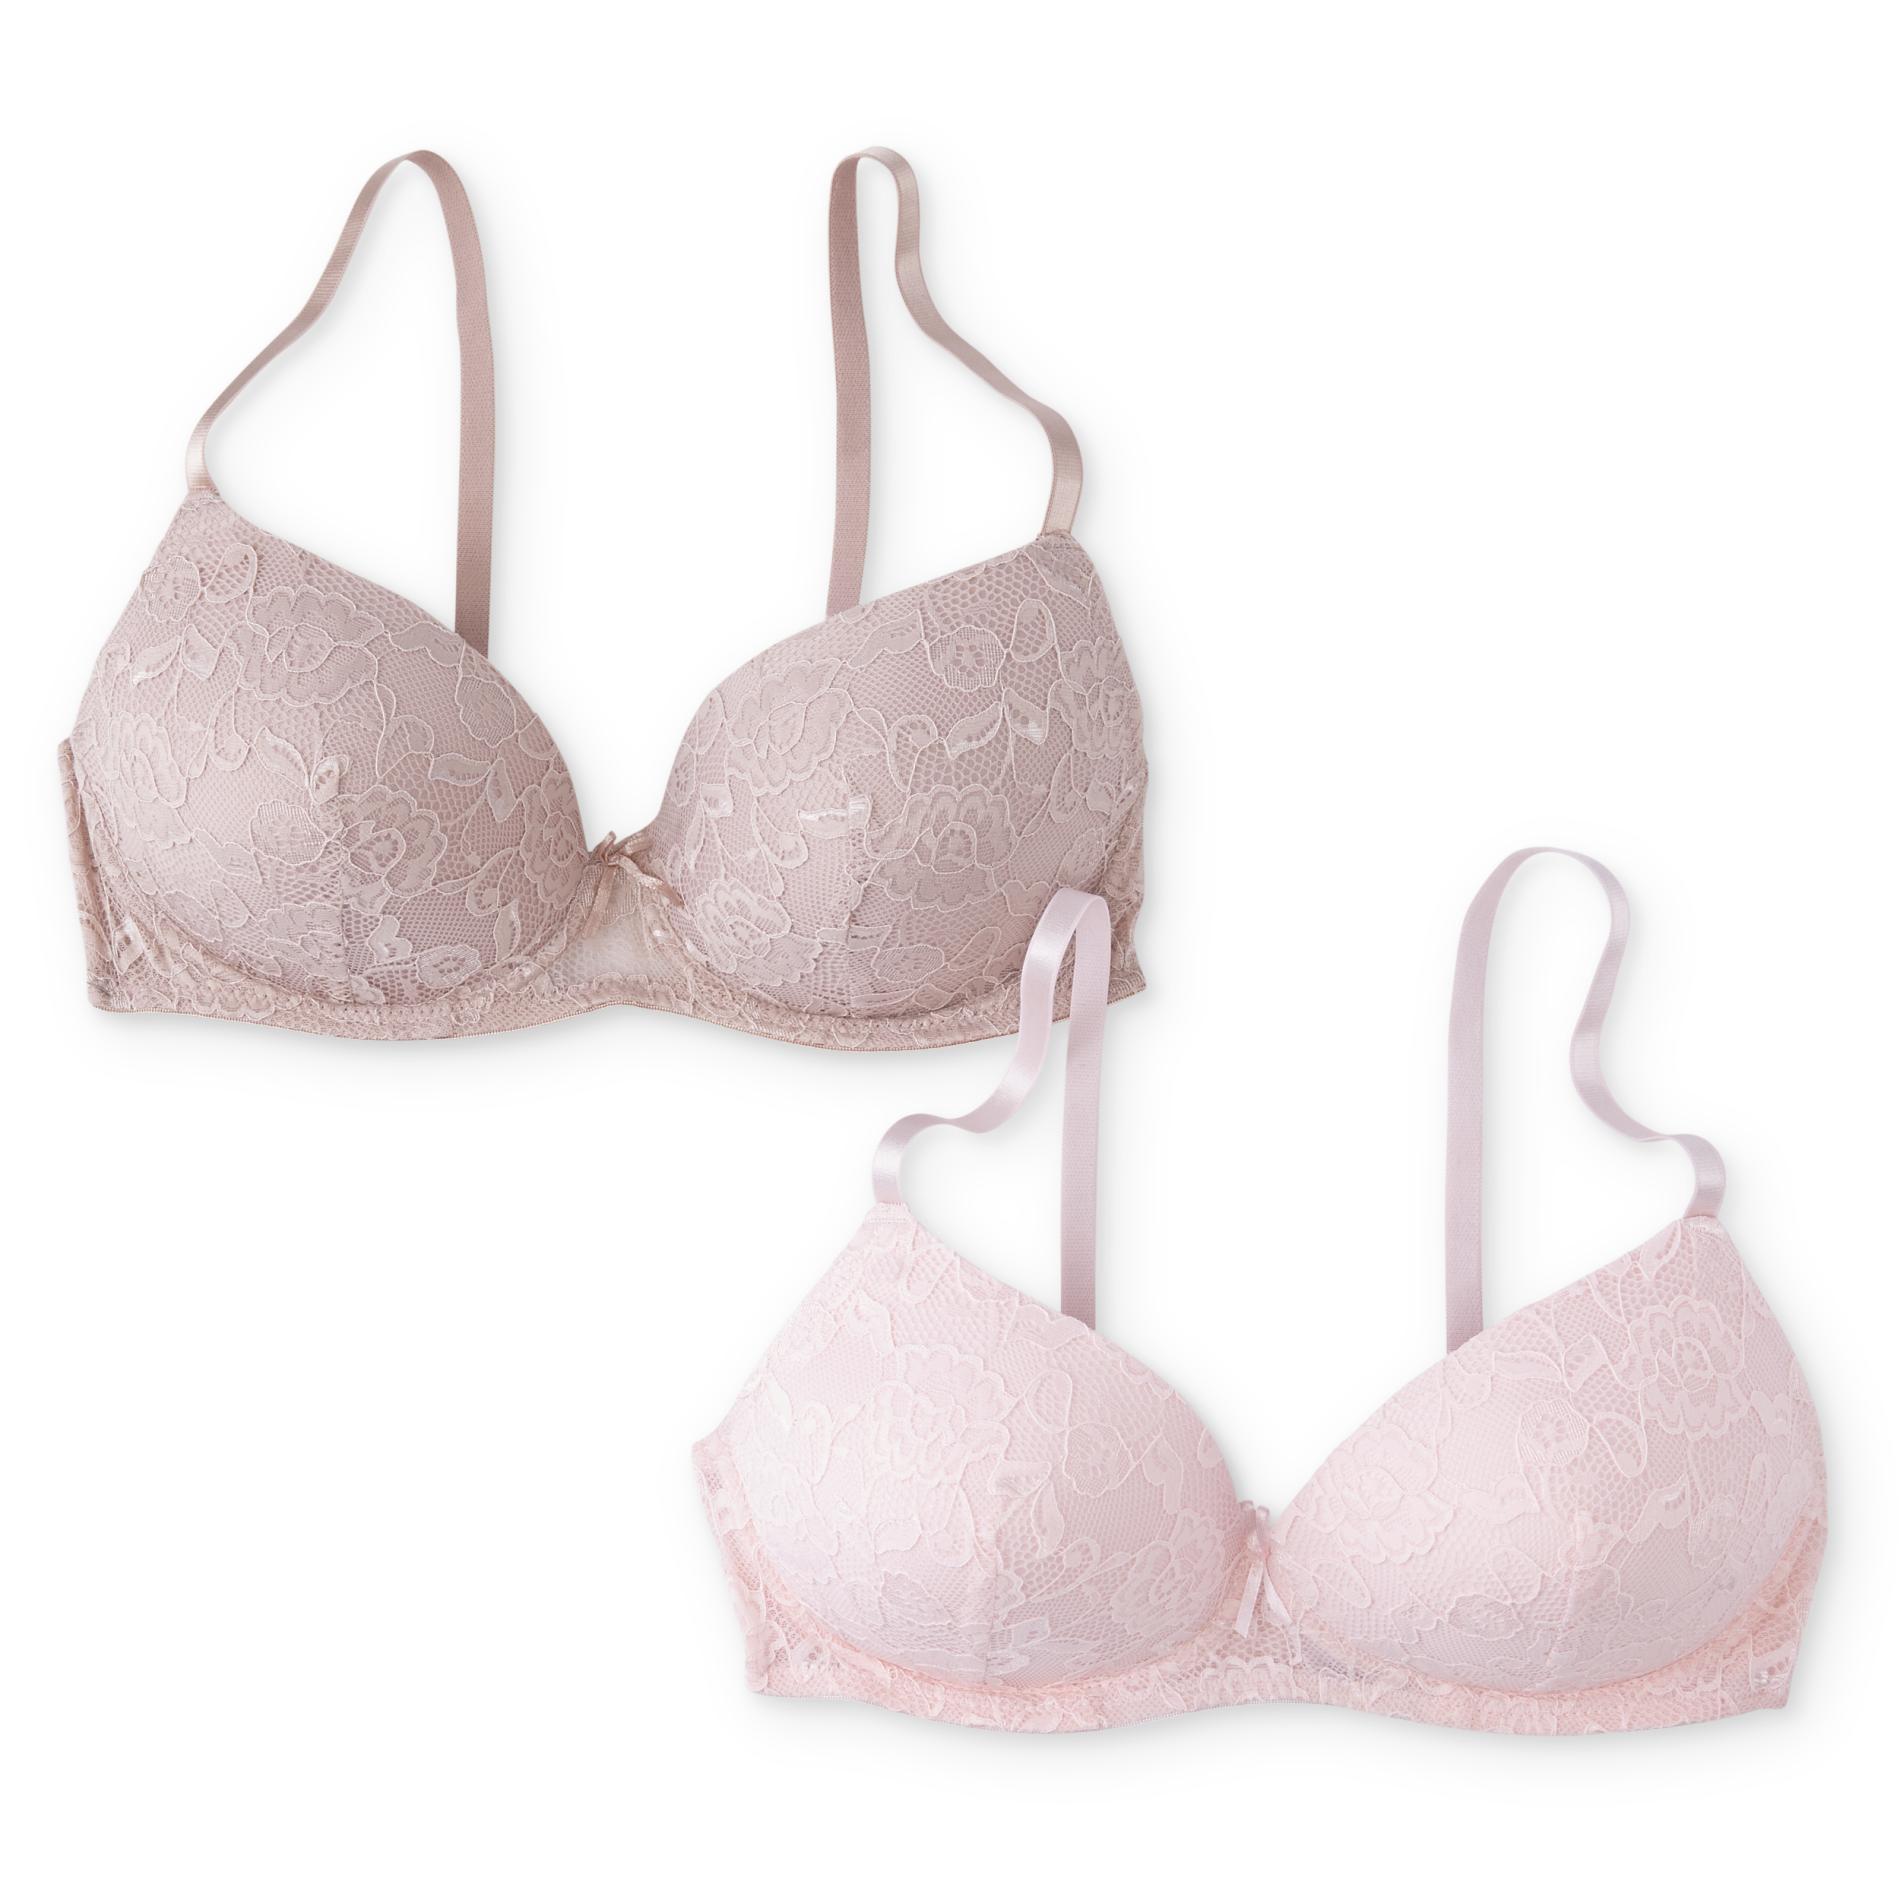 Simply Styled Women's 2-Pack Lace Wire-Free Bras